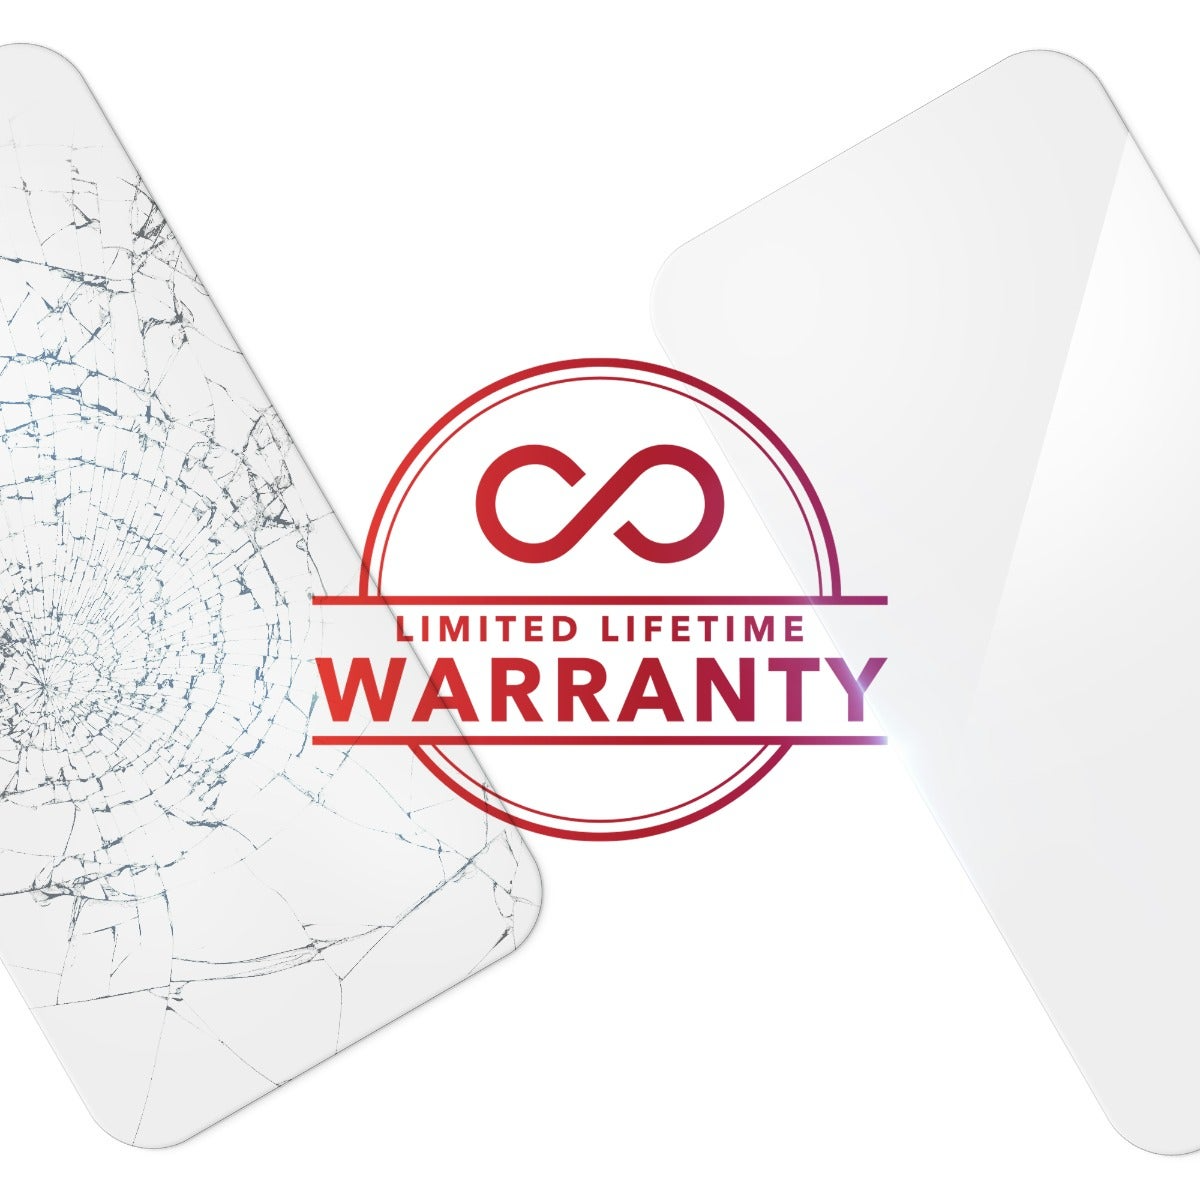 Limited Lifetime Warranty|| If your Glass XTR3 screen protector ever gets worn or damaged, we will replace it for as long as you own your device.